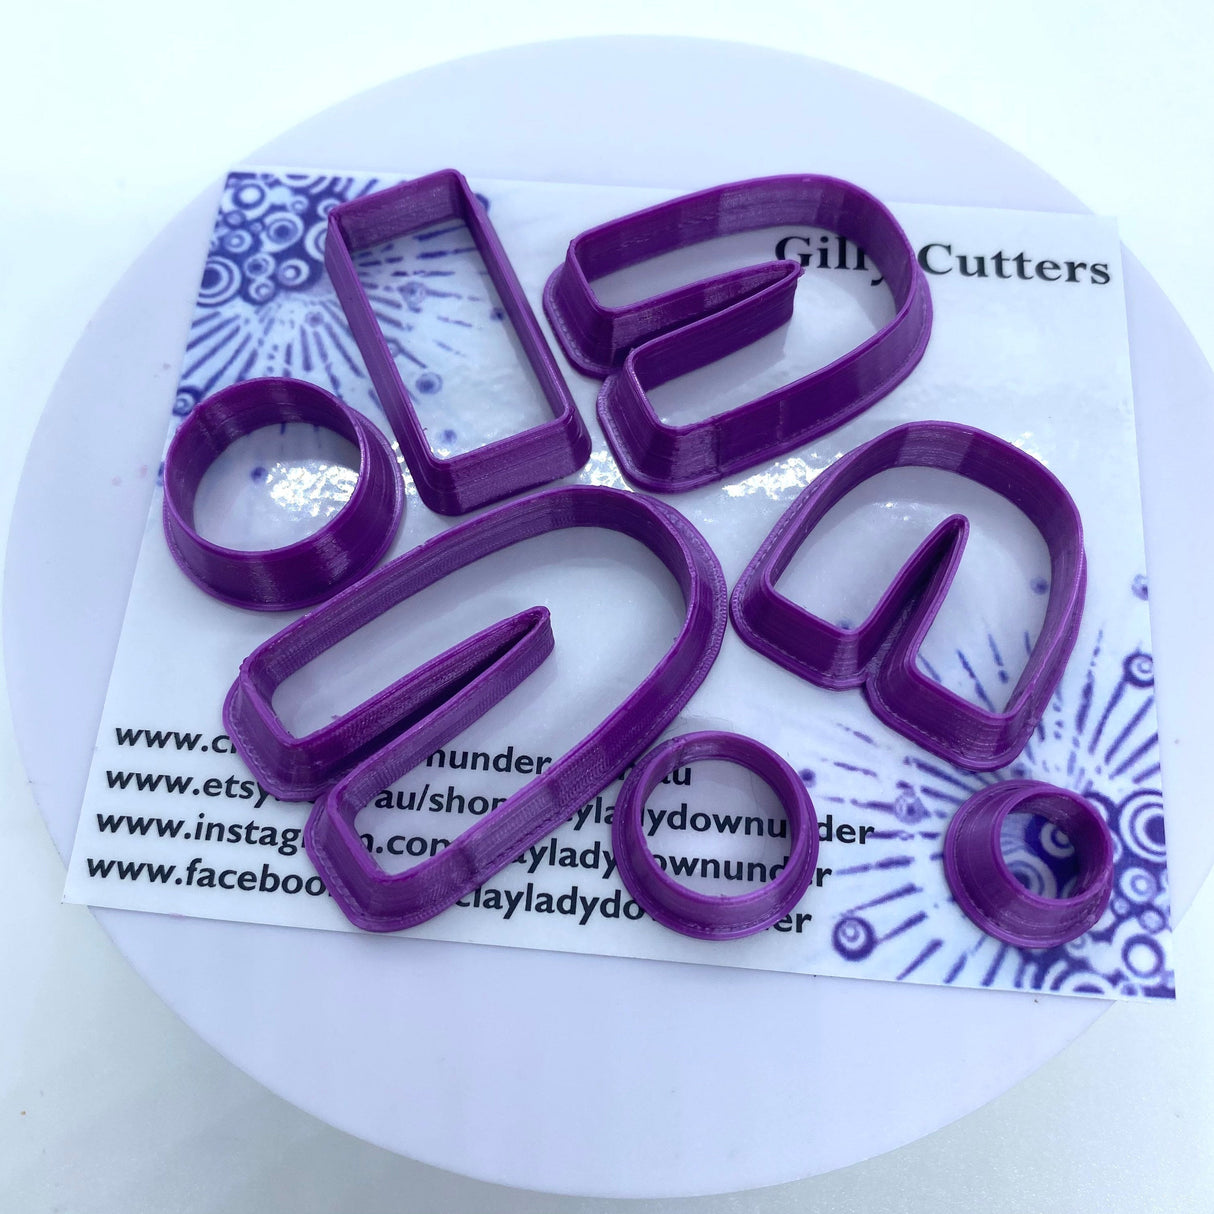 Polymer clay cutters, precious metal (PMC) and ceramic clay cutters, Gilly cutters (Horse Shoe MK II)